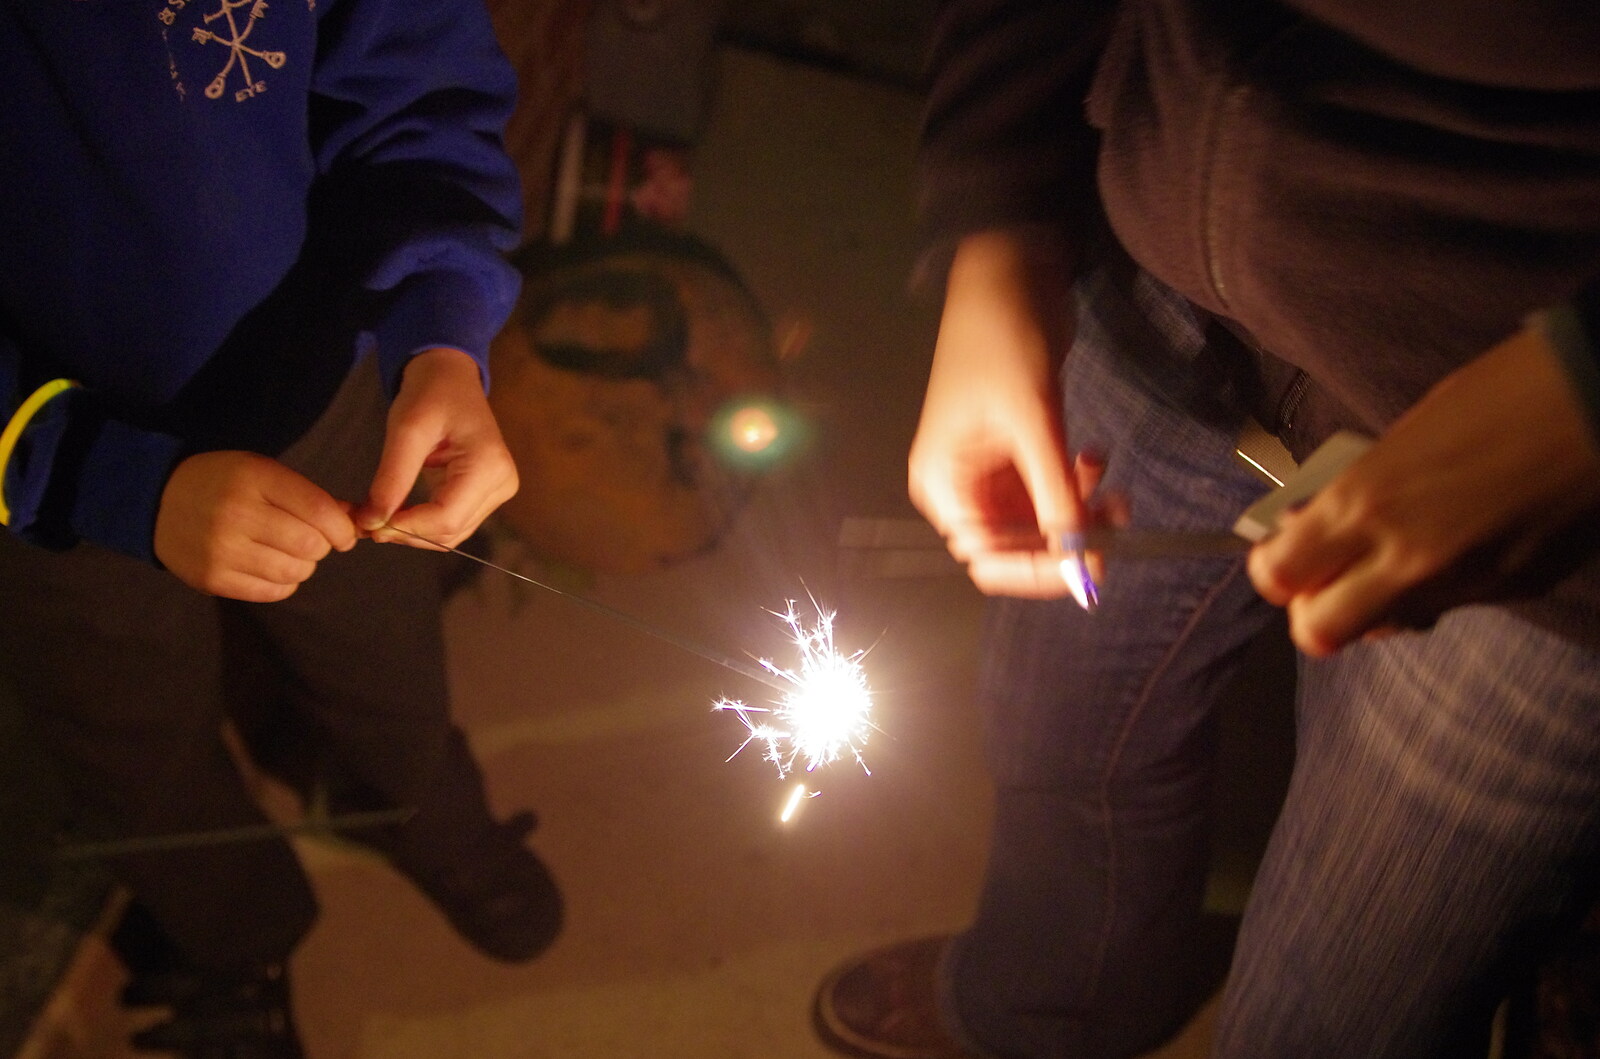 Fred gets a sparkler from The BBs at Centre Parcs, Elvedon, Norfolk - 5th November 2015